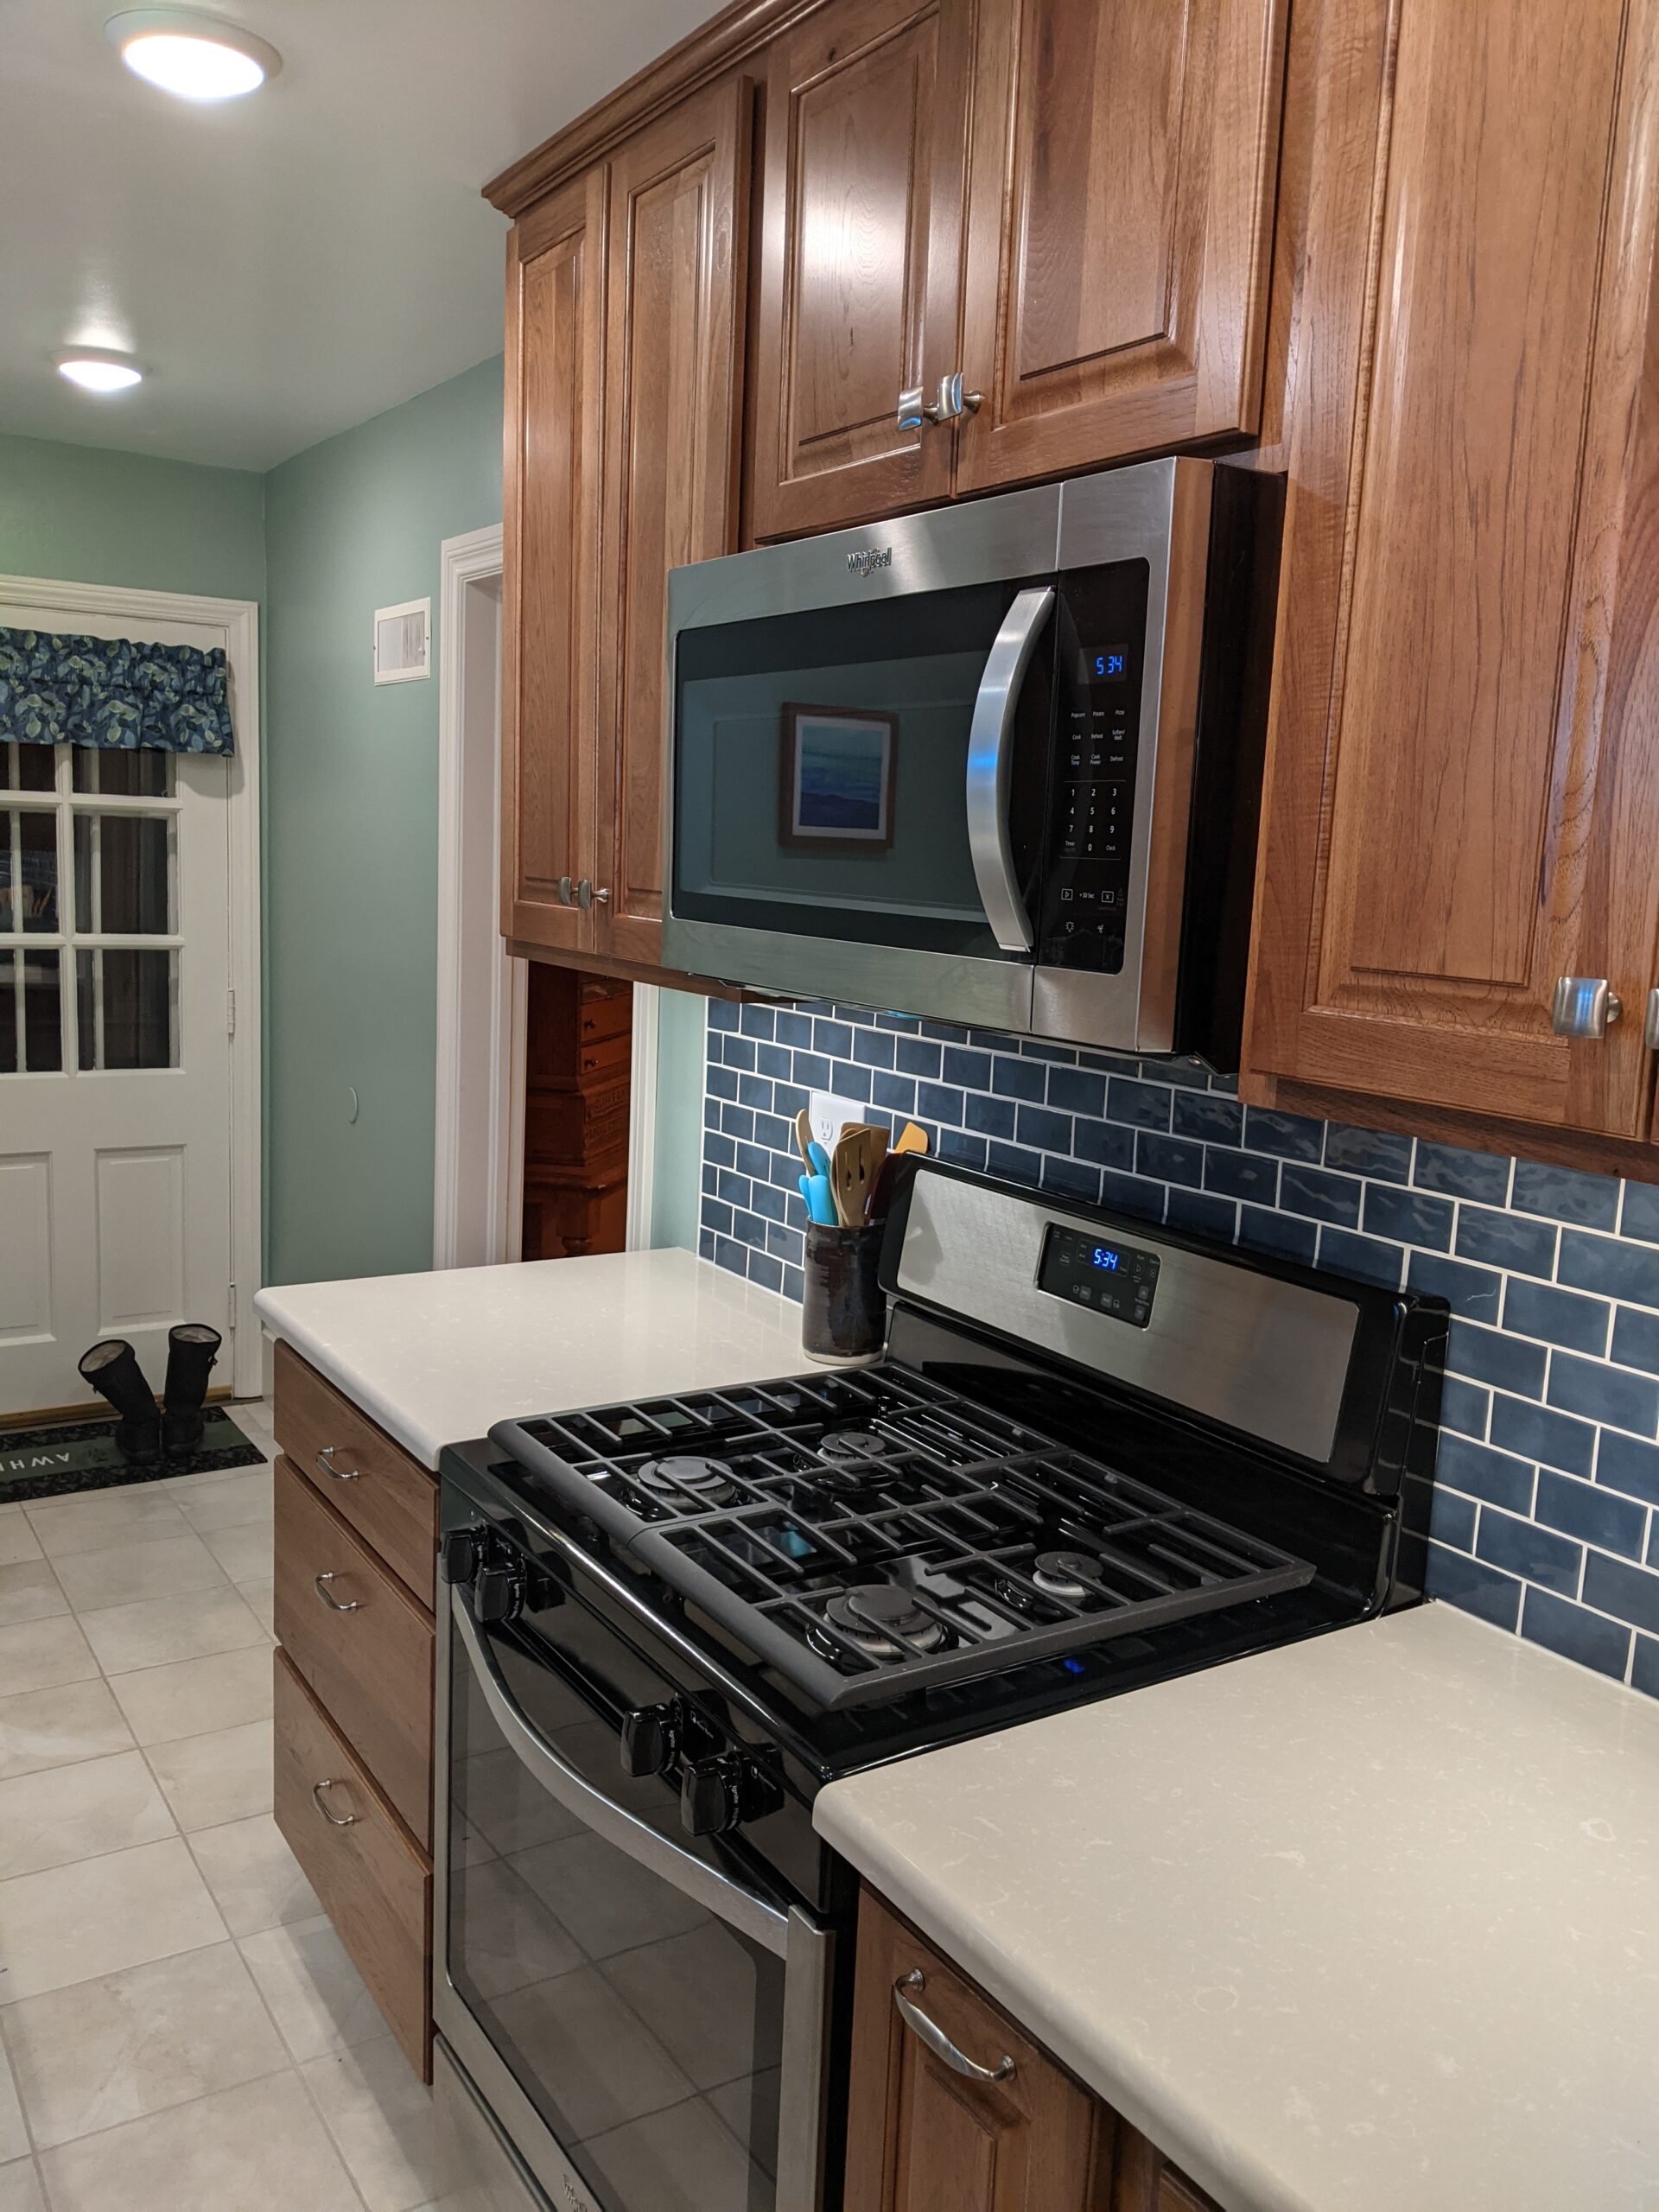 Shows the new stove area with the tiled backsplash and countertop space around the stove